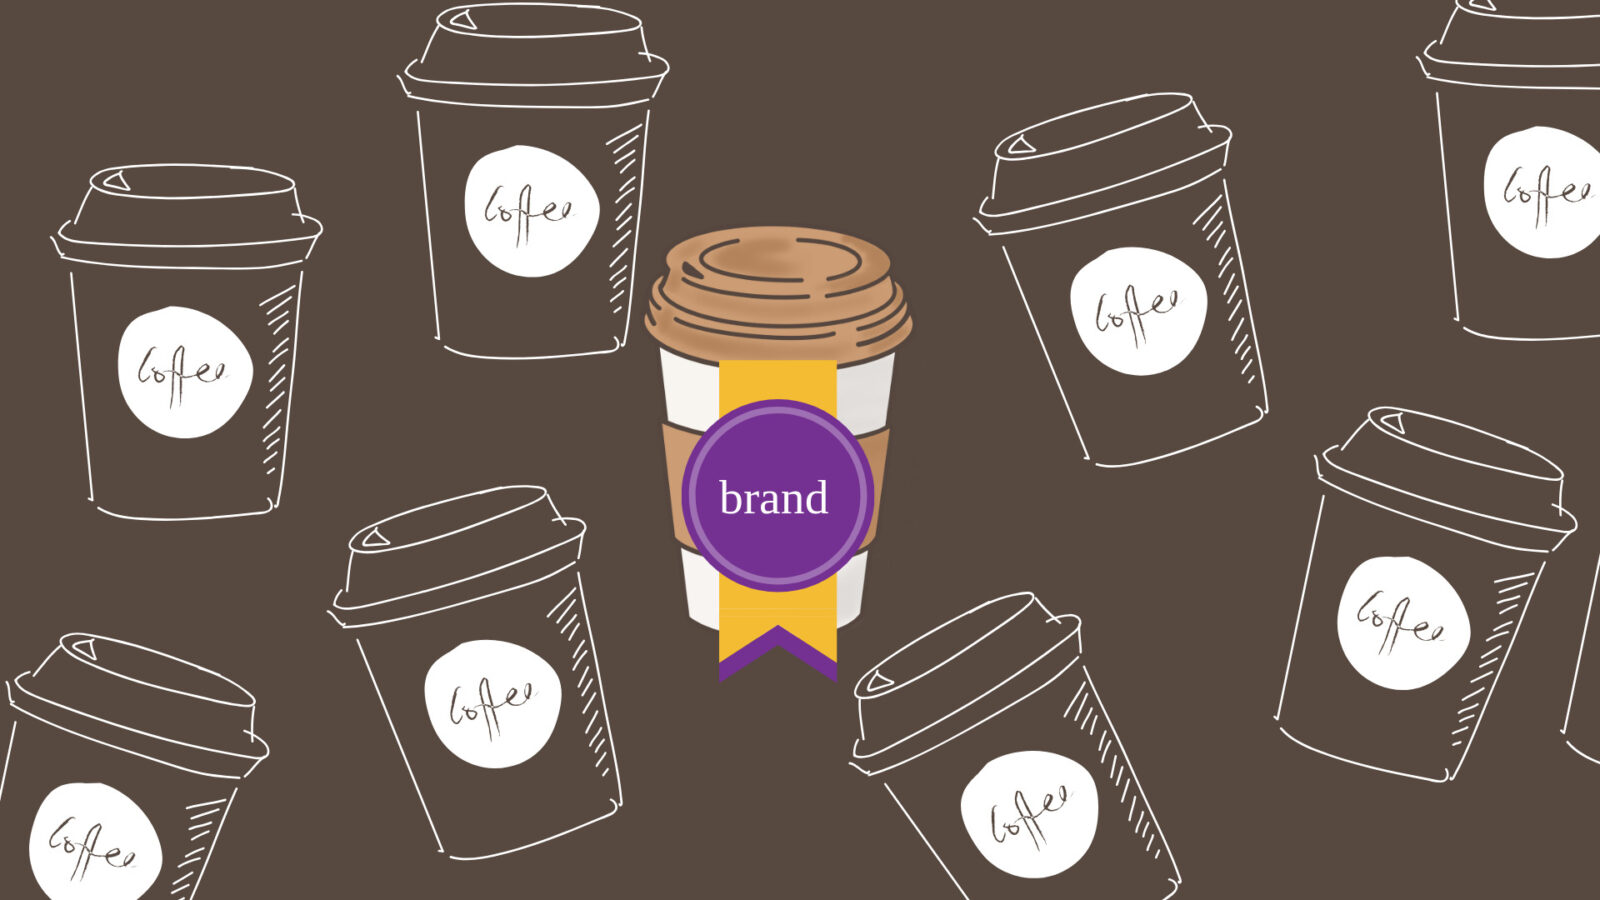 How to build a successful brand on Amazon, Etsy, or Shopify